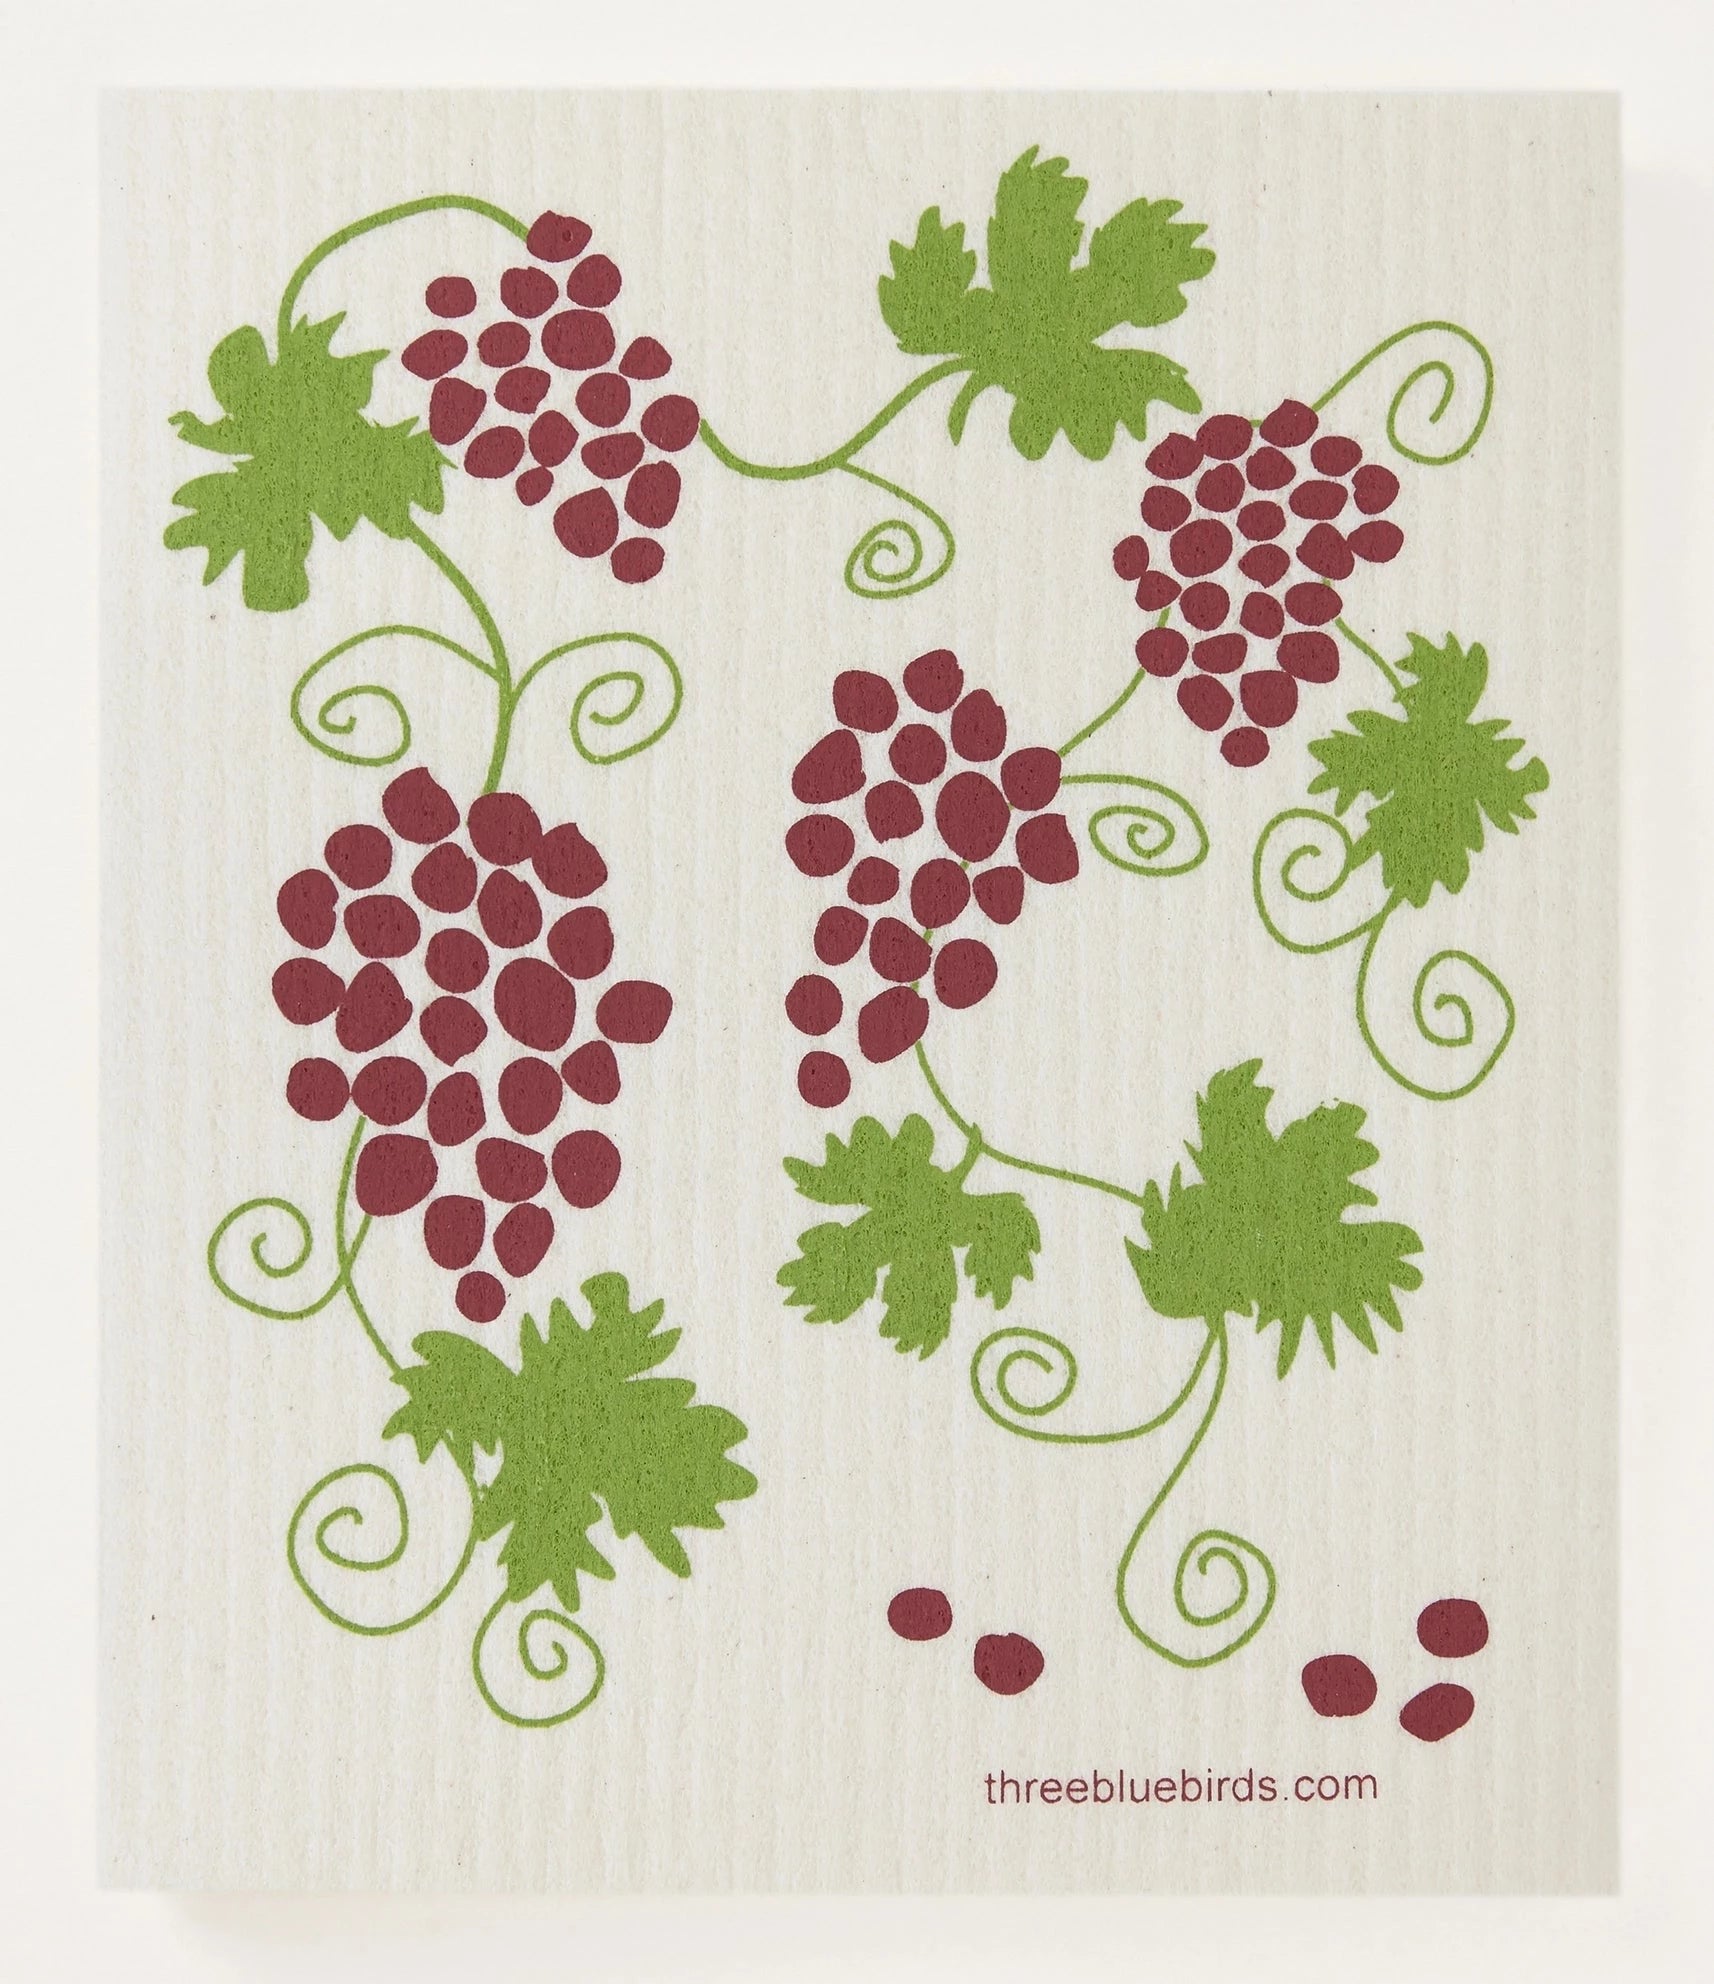 swedish dish cloth with purple grapes on green vines printed on it